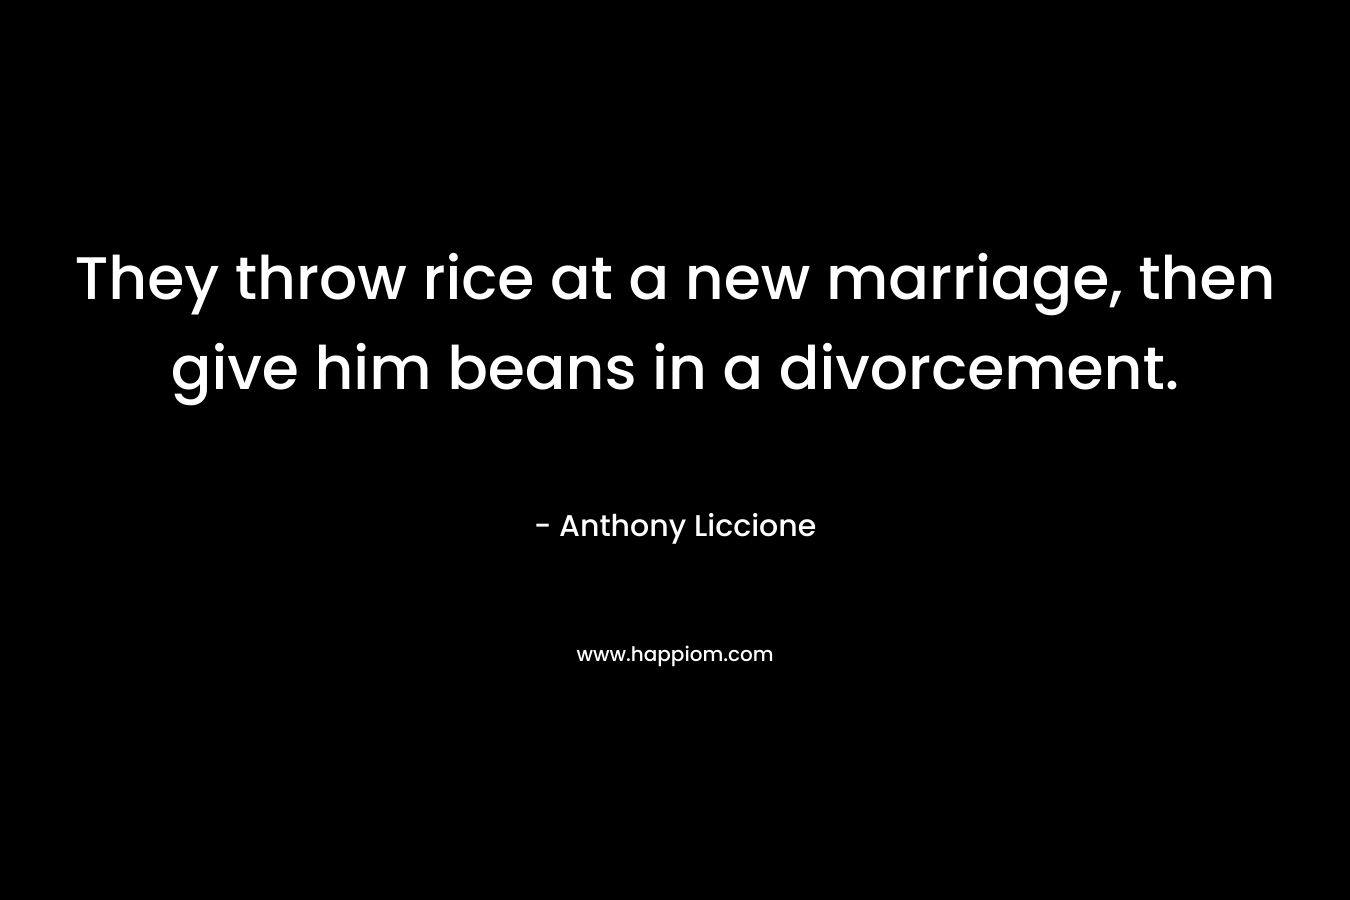 They throw rice at a new marriage, then give him beans in a divorcement. – Anthony Liccione